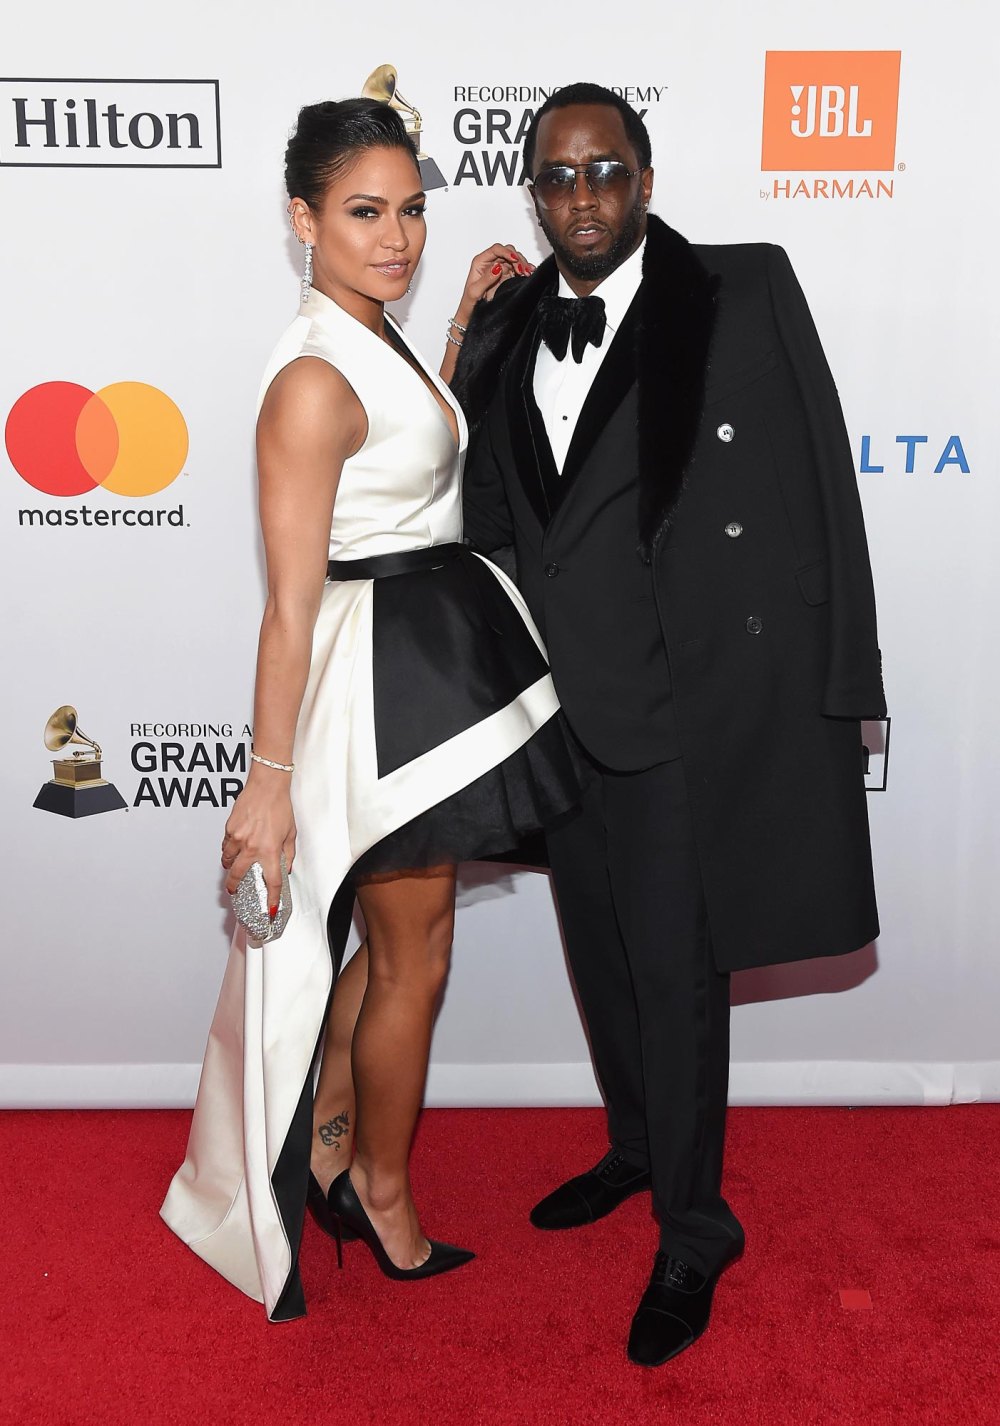 Are Puff Daddy and Cassie finally done?